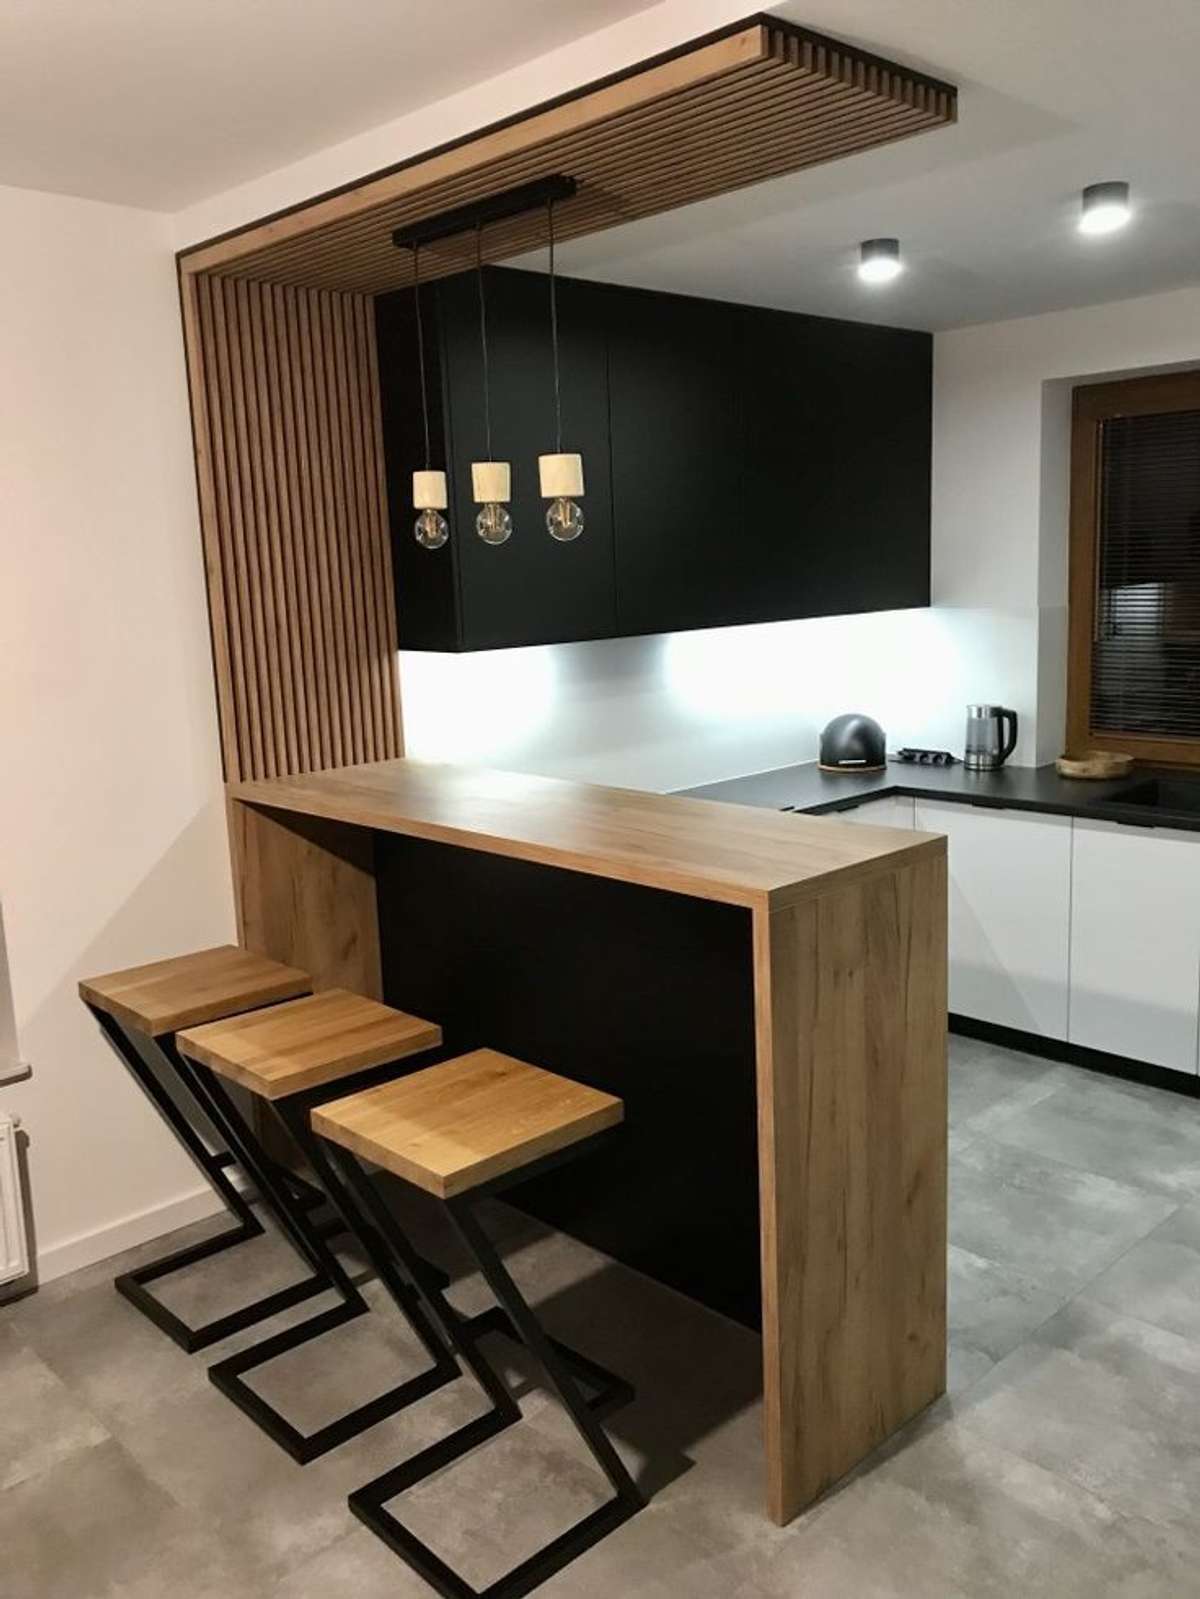 Modular kitchen starting square feet price Rs : 1500
 #ModularKitchen  #KitchenIdeas #OpenKitchnen #nearme #rate #education #bedroom #kitchen  #living   #Filters  #Near  #Me  #Bedroom  #WindowRates  # #Home  #Decor  # #Roof   #Ceiling   #Electricals  #Education  #Flooring  #Prayer  #Room  #Bathroom   #Ki  #Living  #Wall  #Door  #Table  #Staircase  #Plans  #Dining  #Lighting  #Furniture  #apply  #Storage  #Exterior  #Outdoor